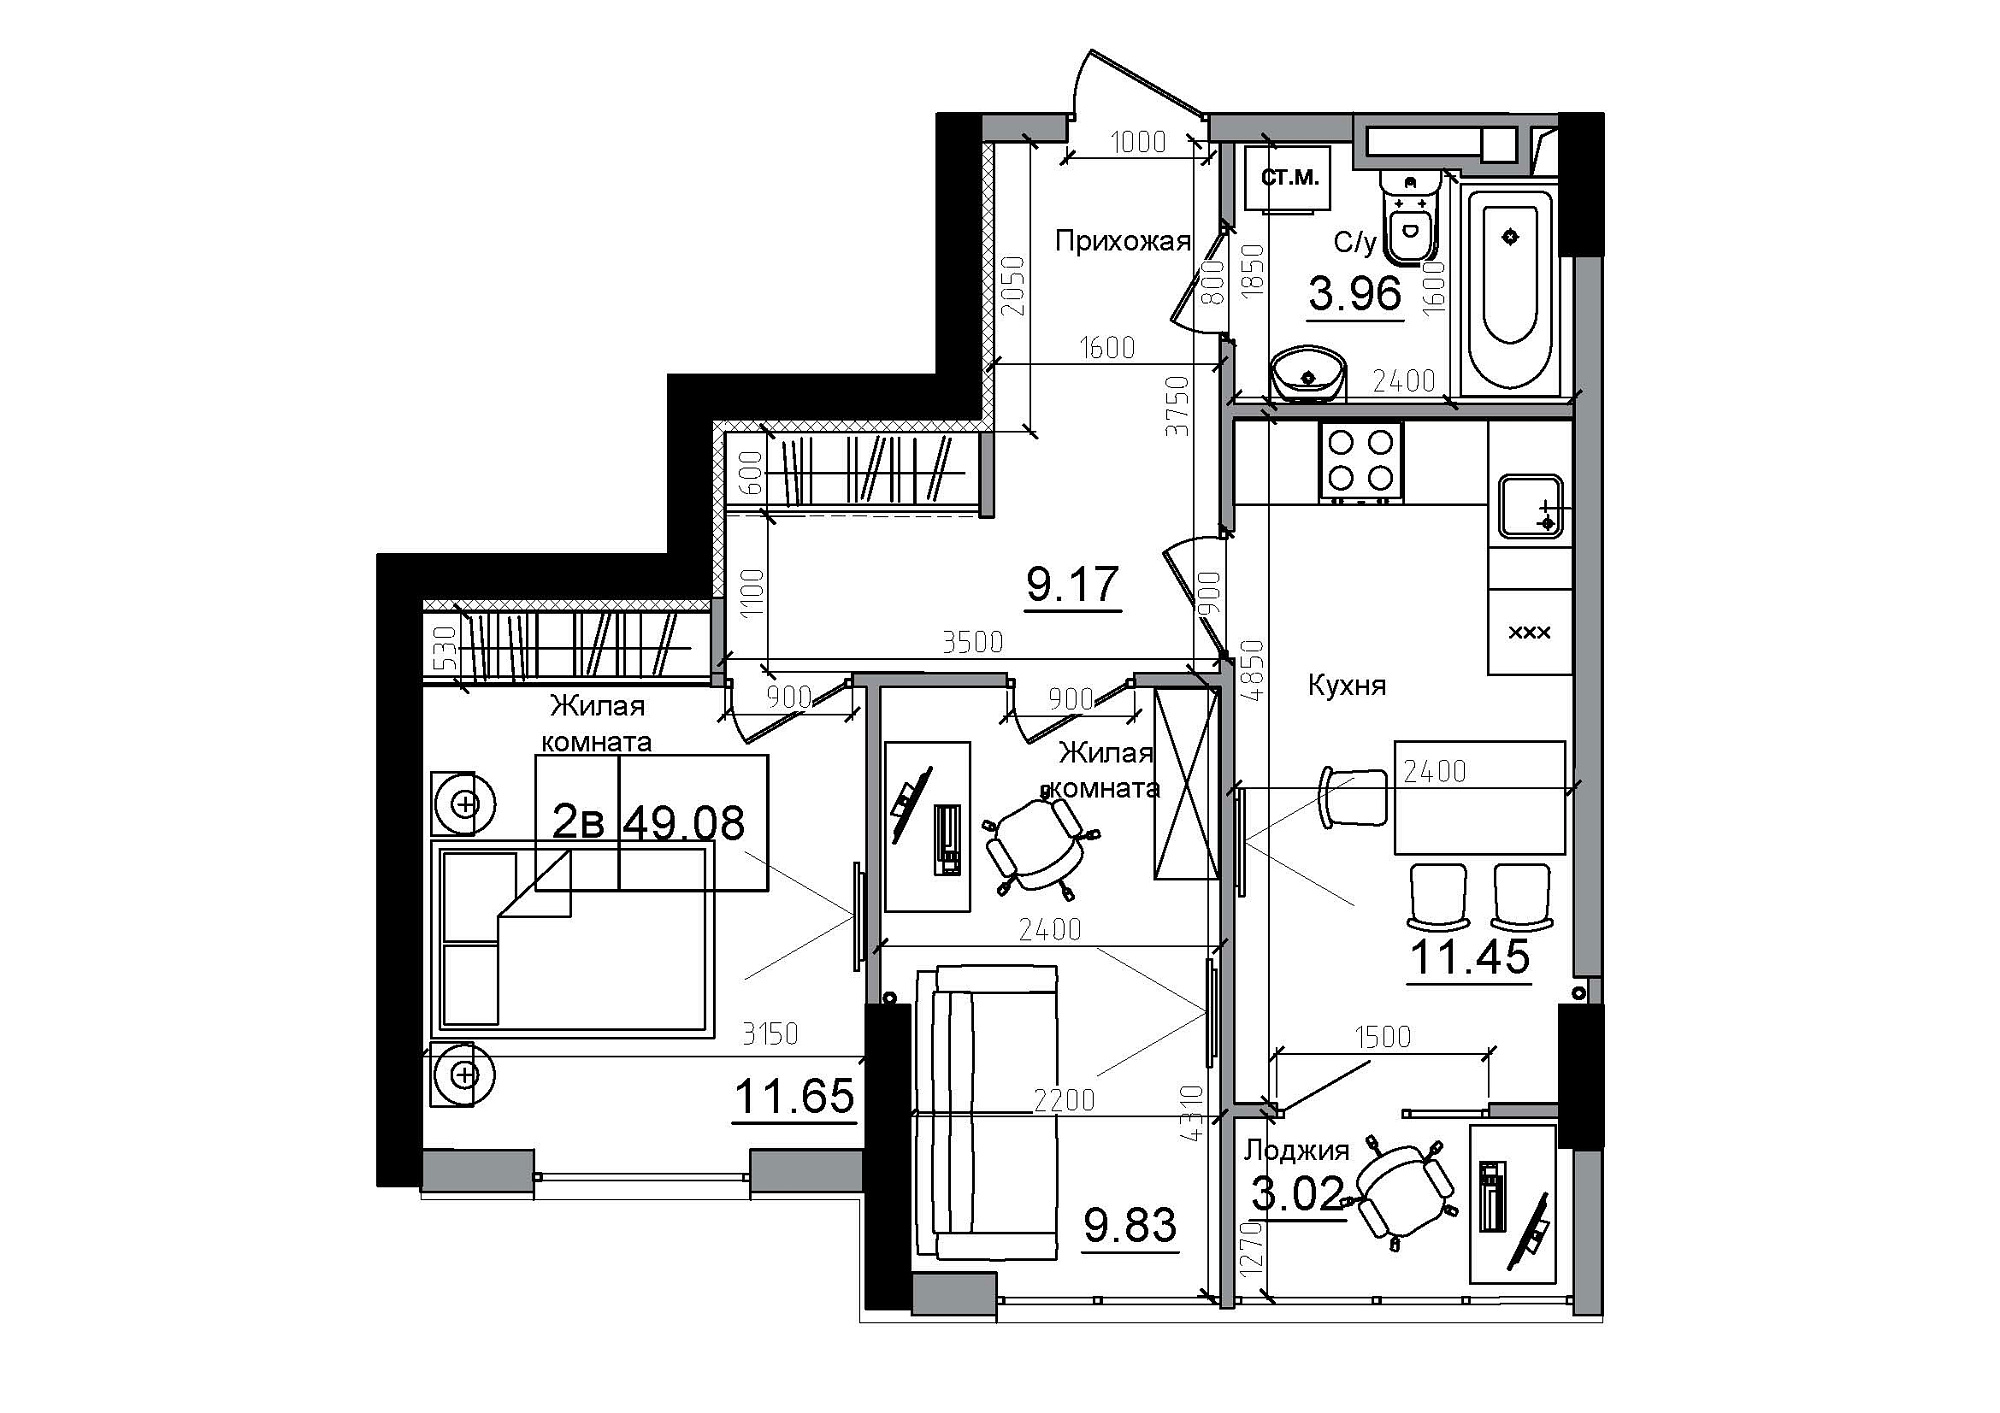 Planning 2-rm flats area 49.08m2, AB-12-08/00015.